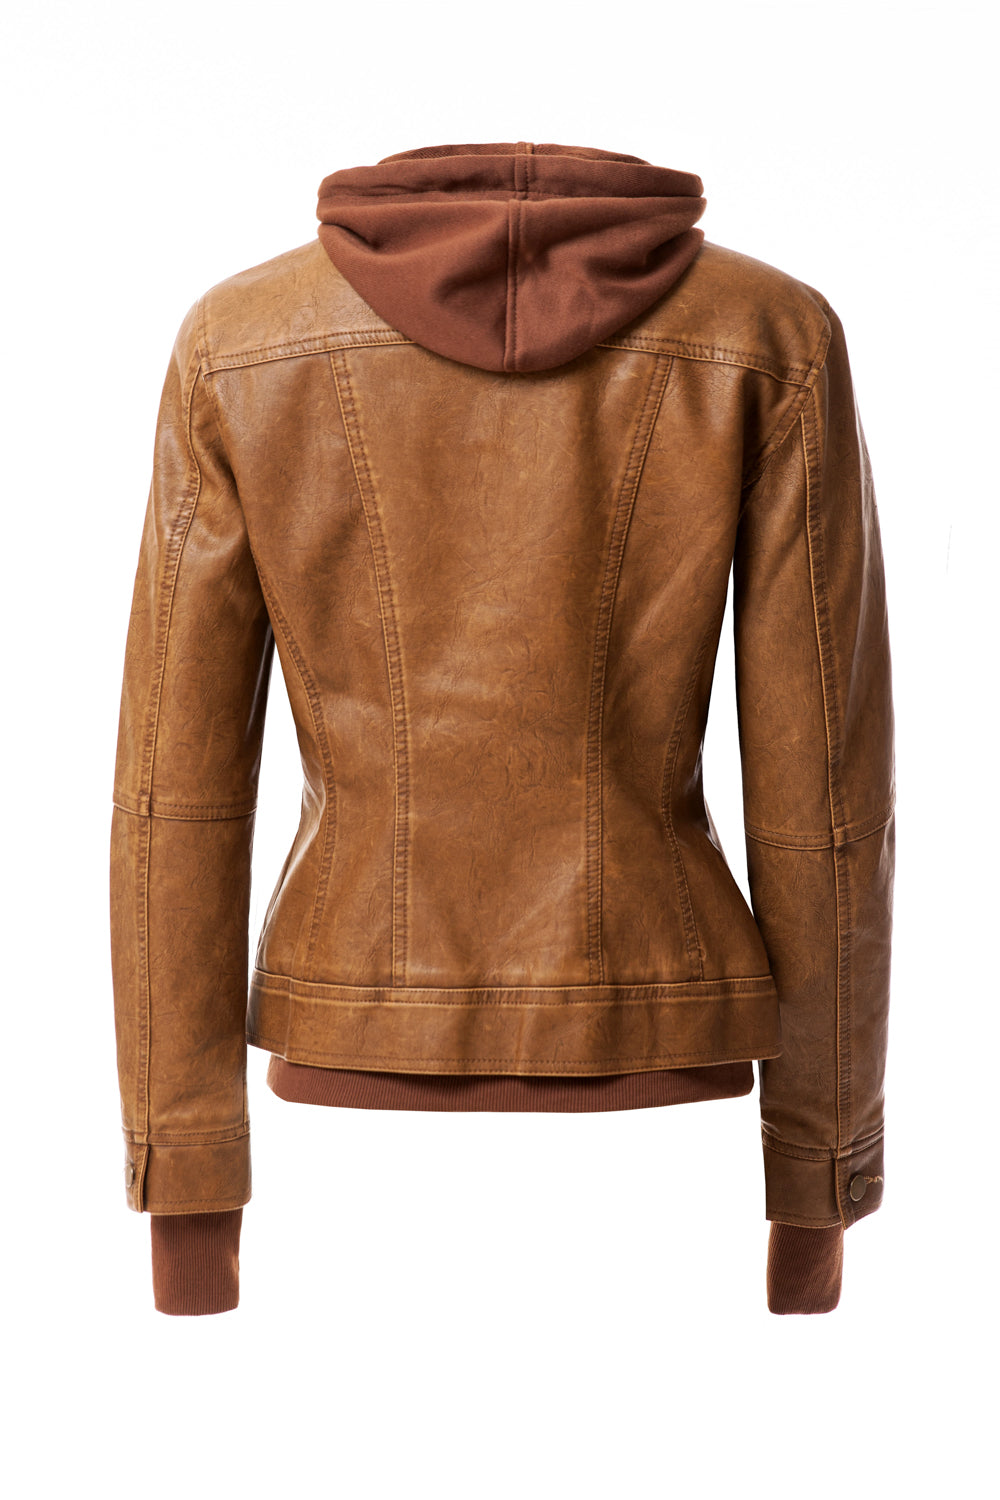 Women's Casual Stand Collar Detachable Hood PU Leather Jacket